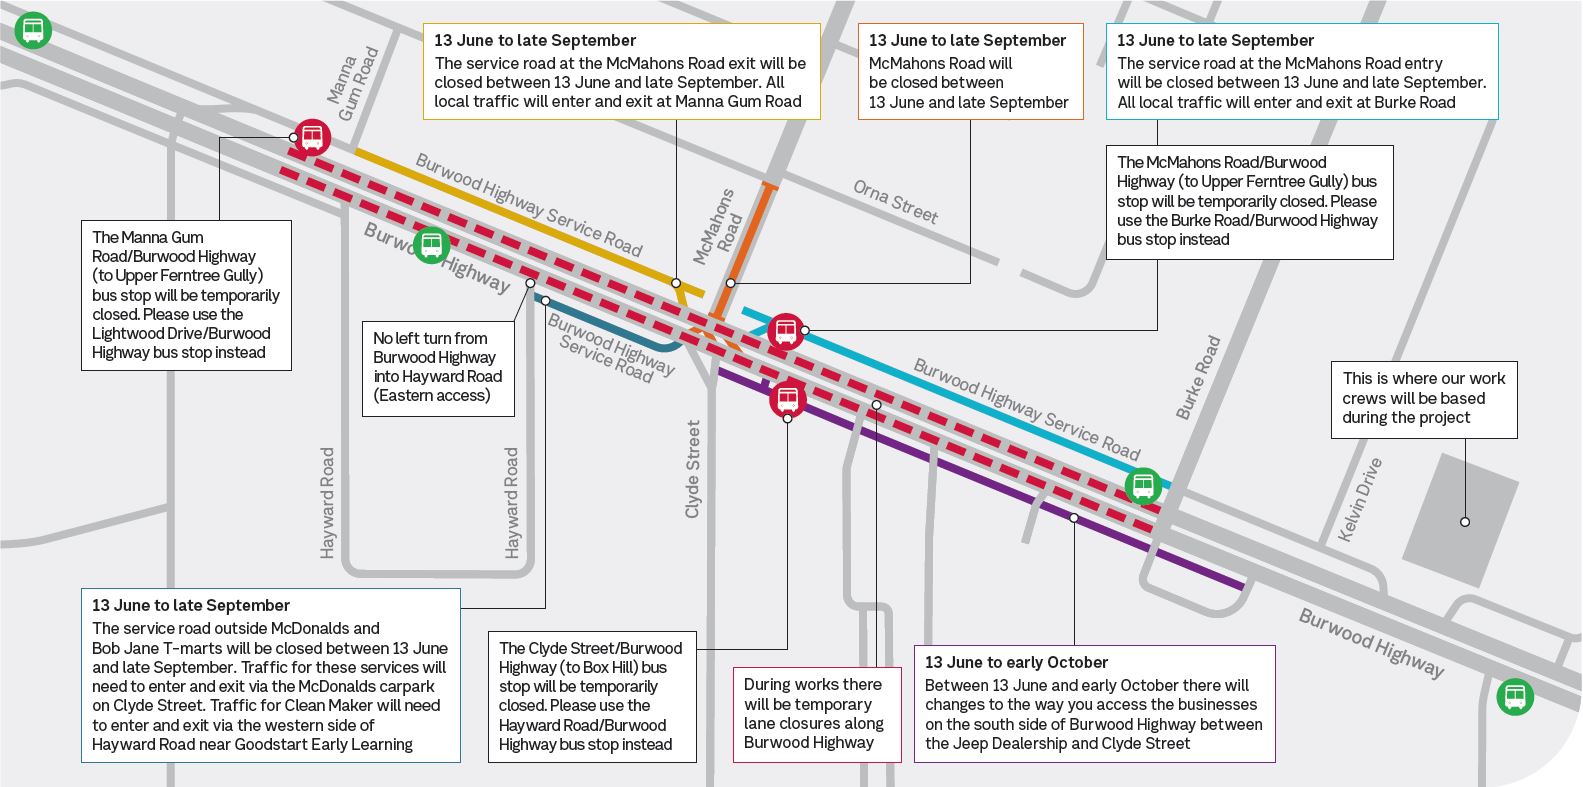 Burwood Highway intersection upgrades at McMahons Road